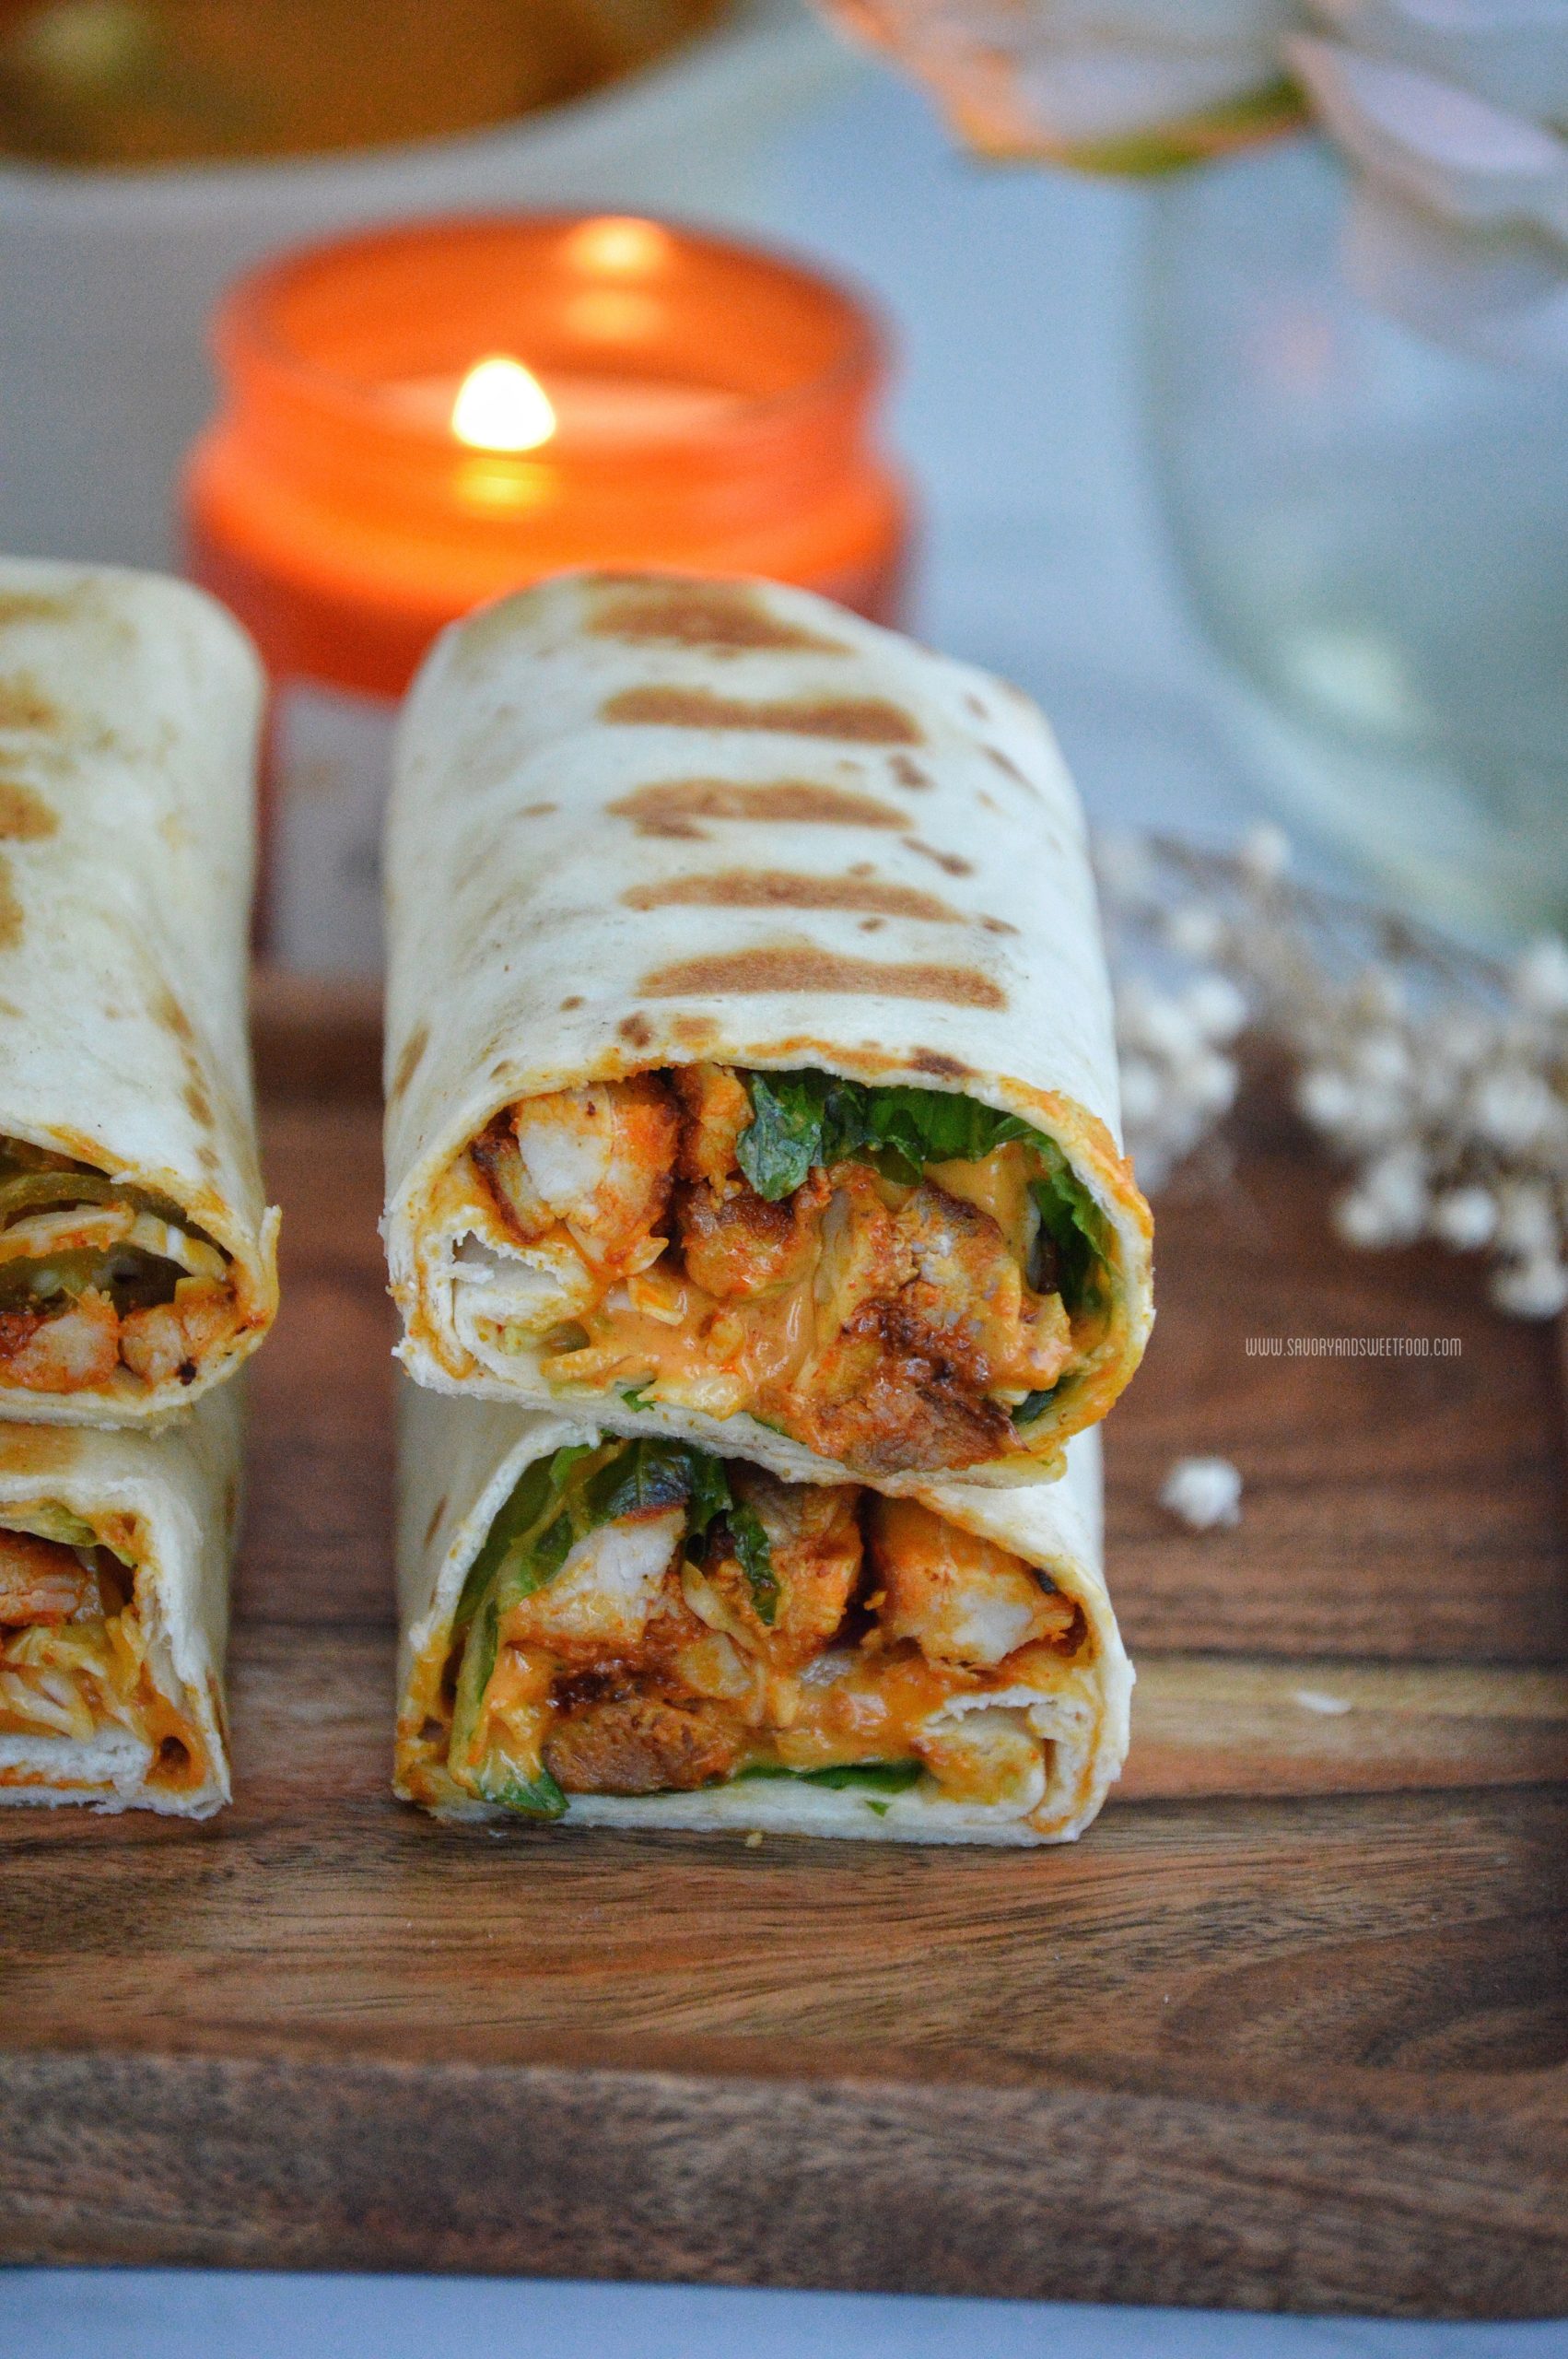 Chicken Kebab Wraps with Special Spicy Sauce - Savory&SweetFood